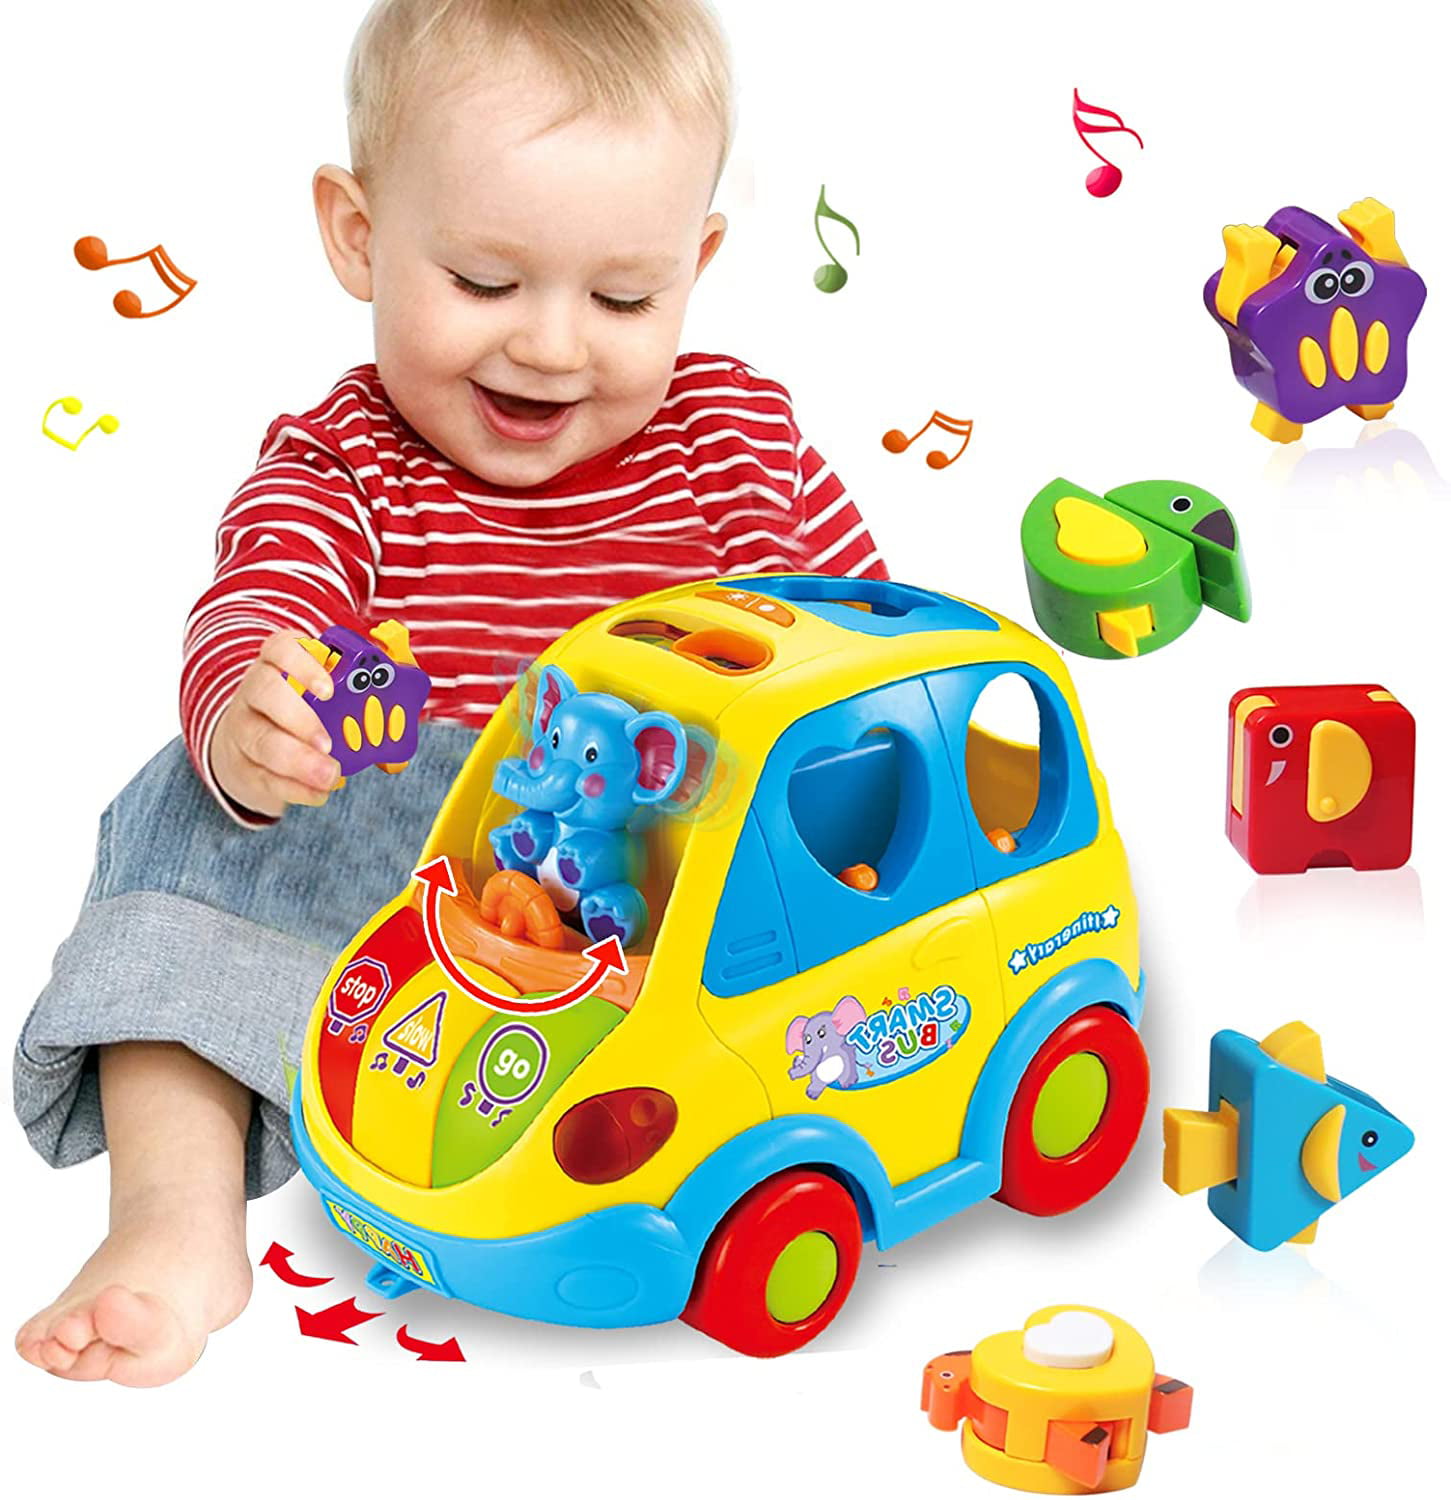 ACTRINIC Baby Musical Toys 12-18months Drums Piano Musical Instrument,Learning 1 